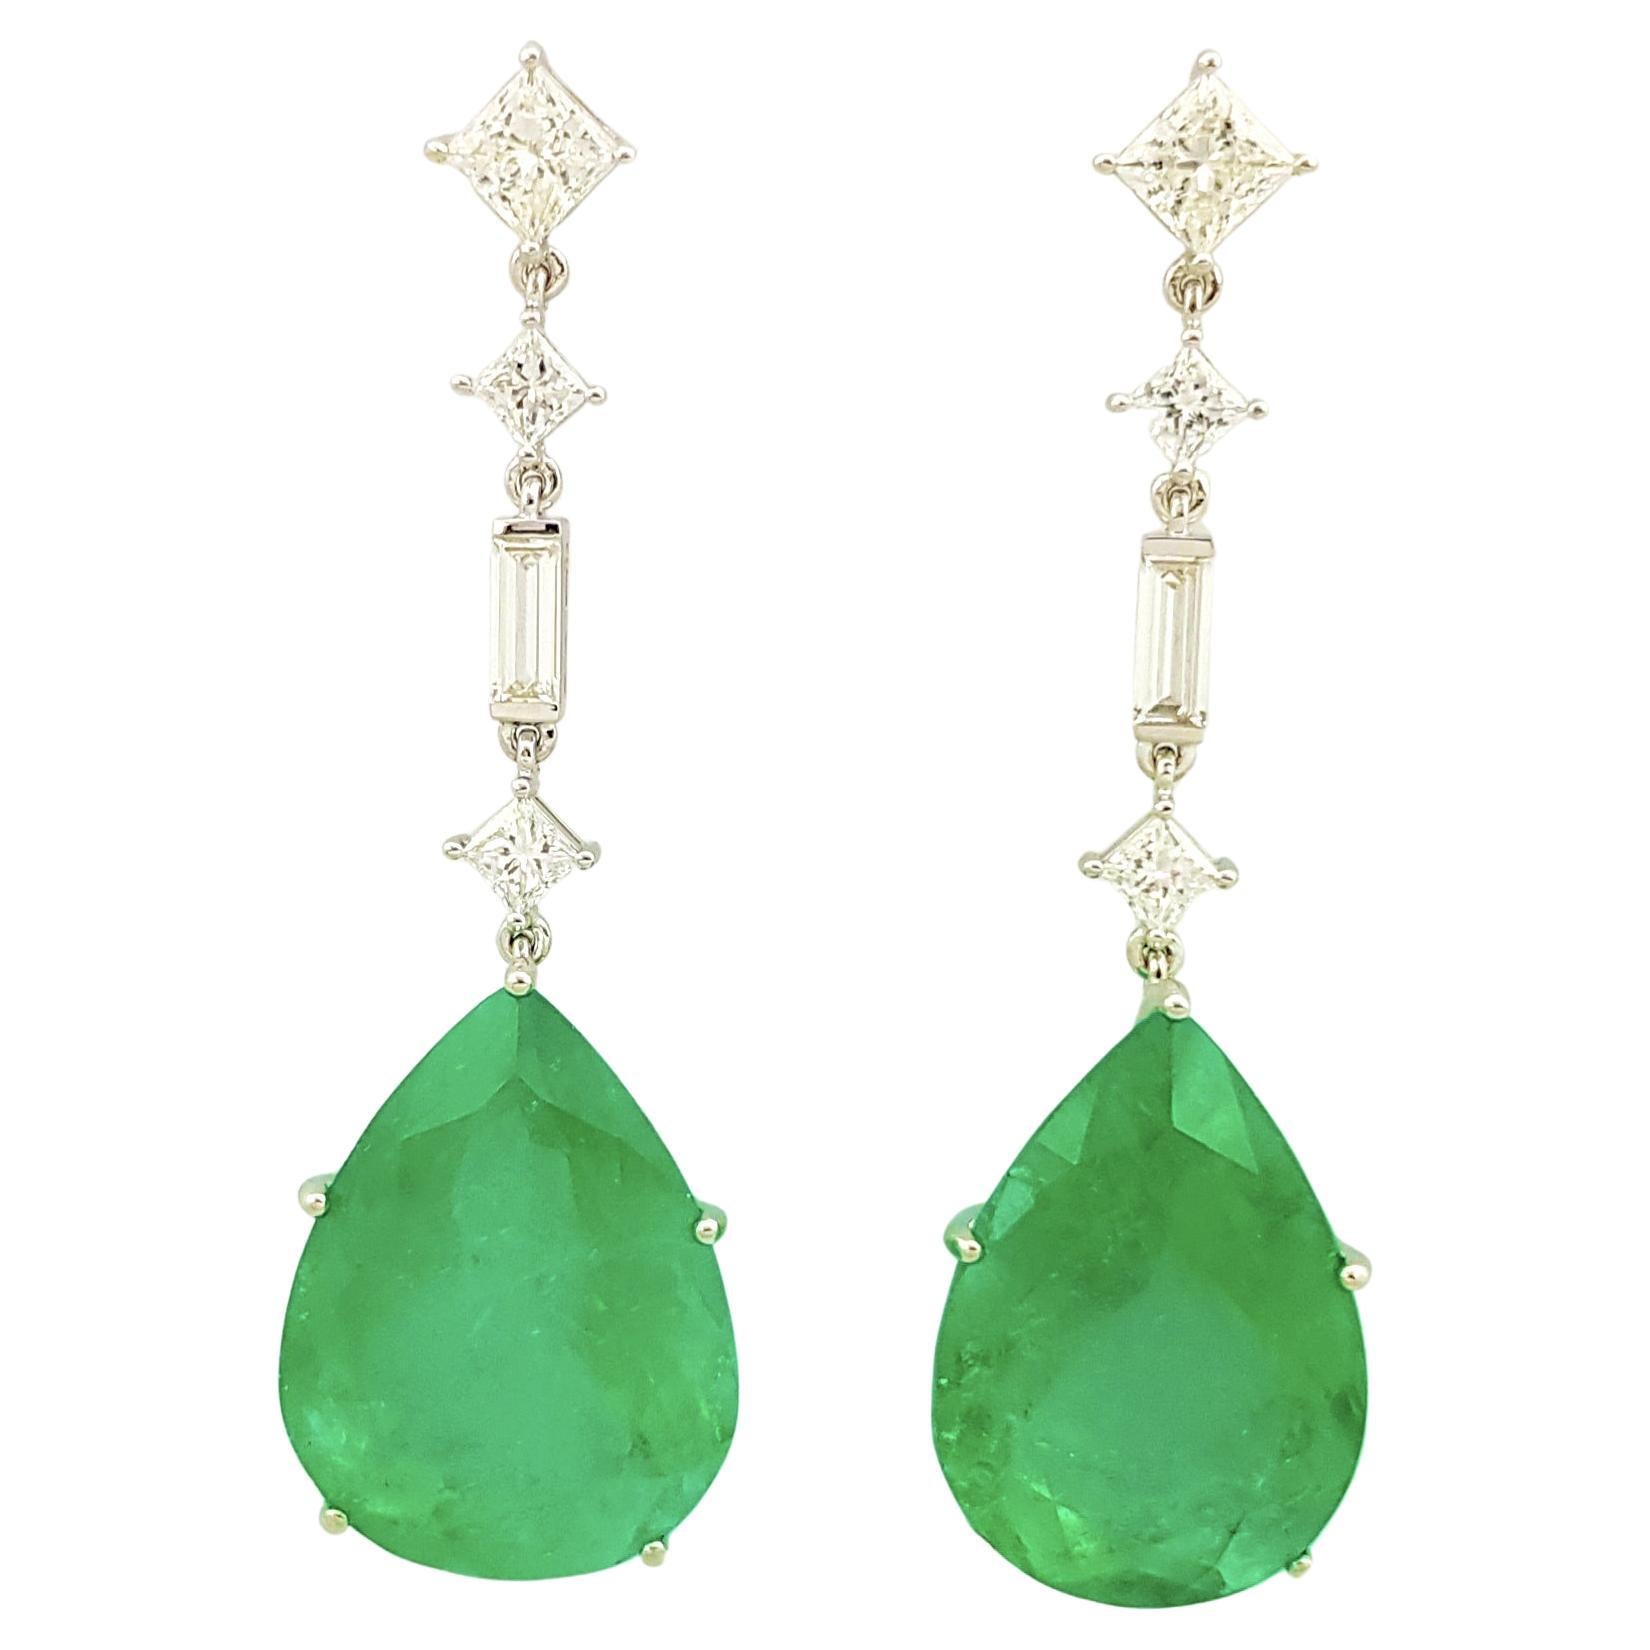 GIA Certified Colombian Emerald with Diamond Earrings set in Platinum 950